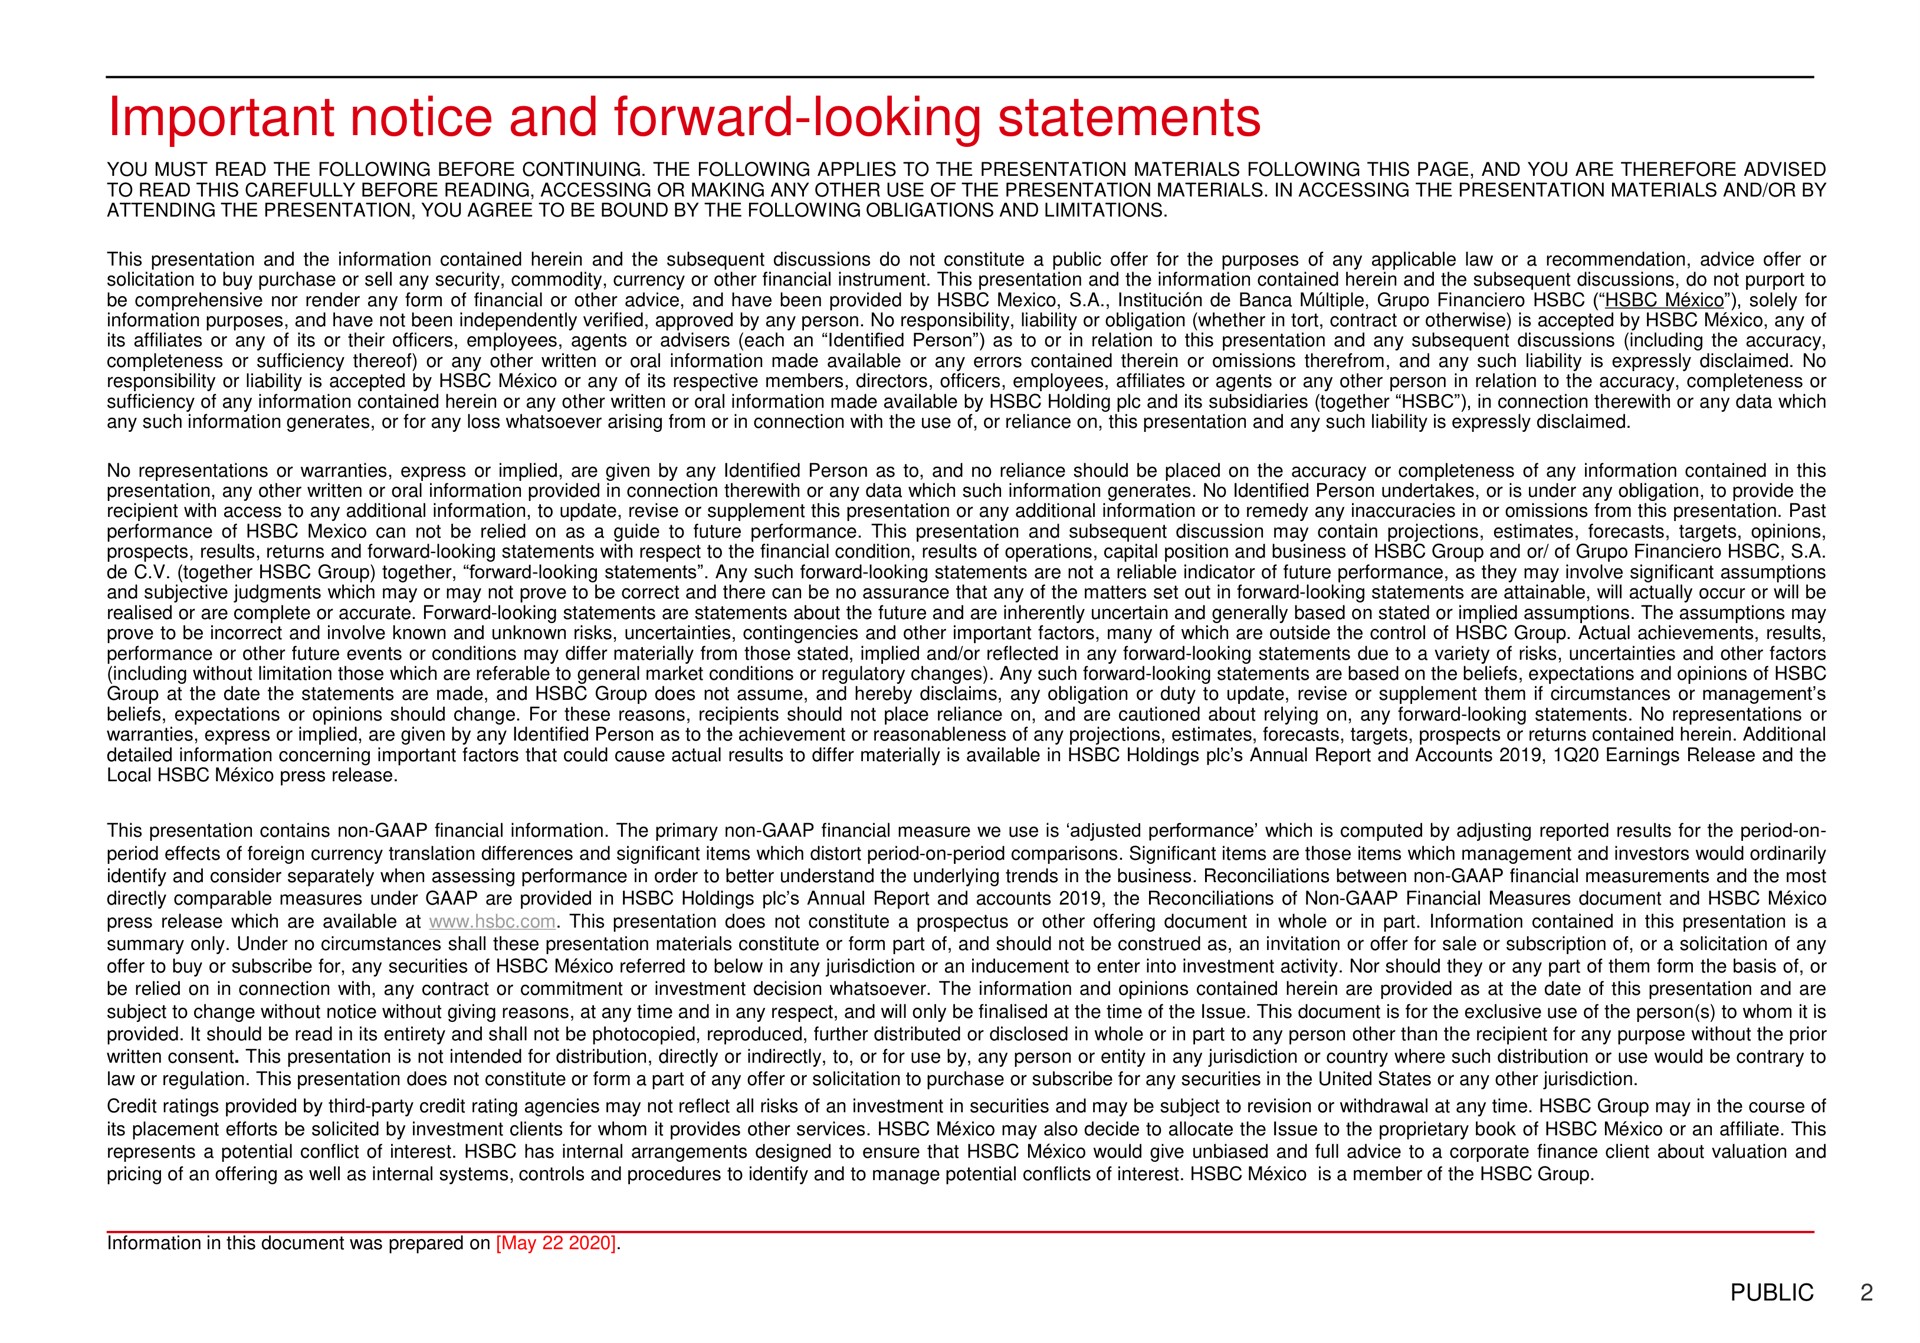 important notice and forward looking statements | HSBC